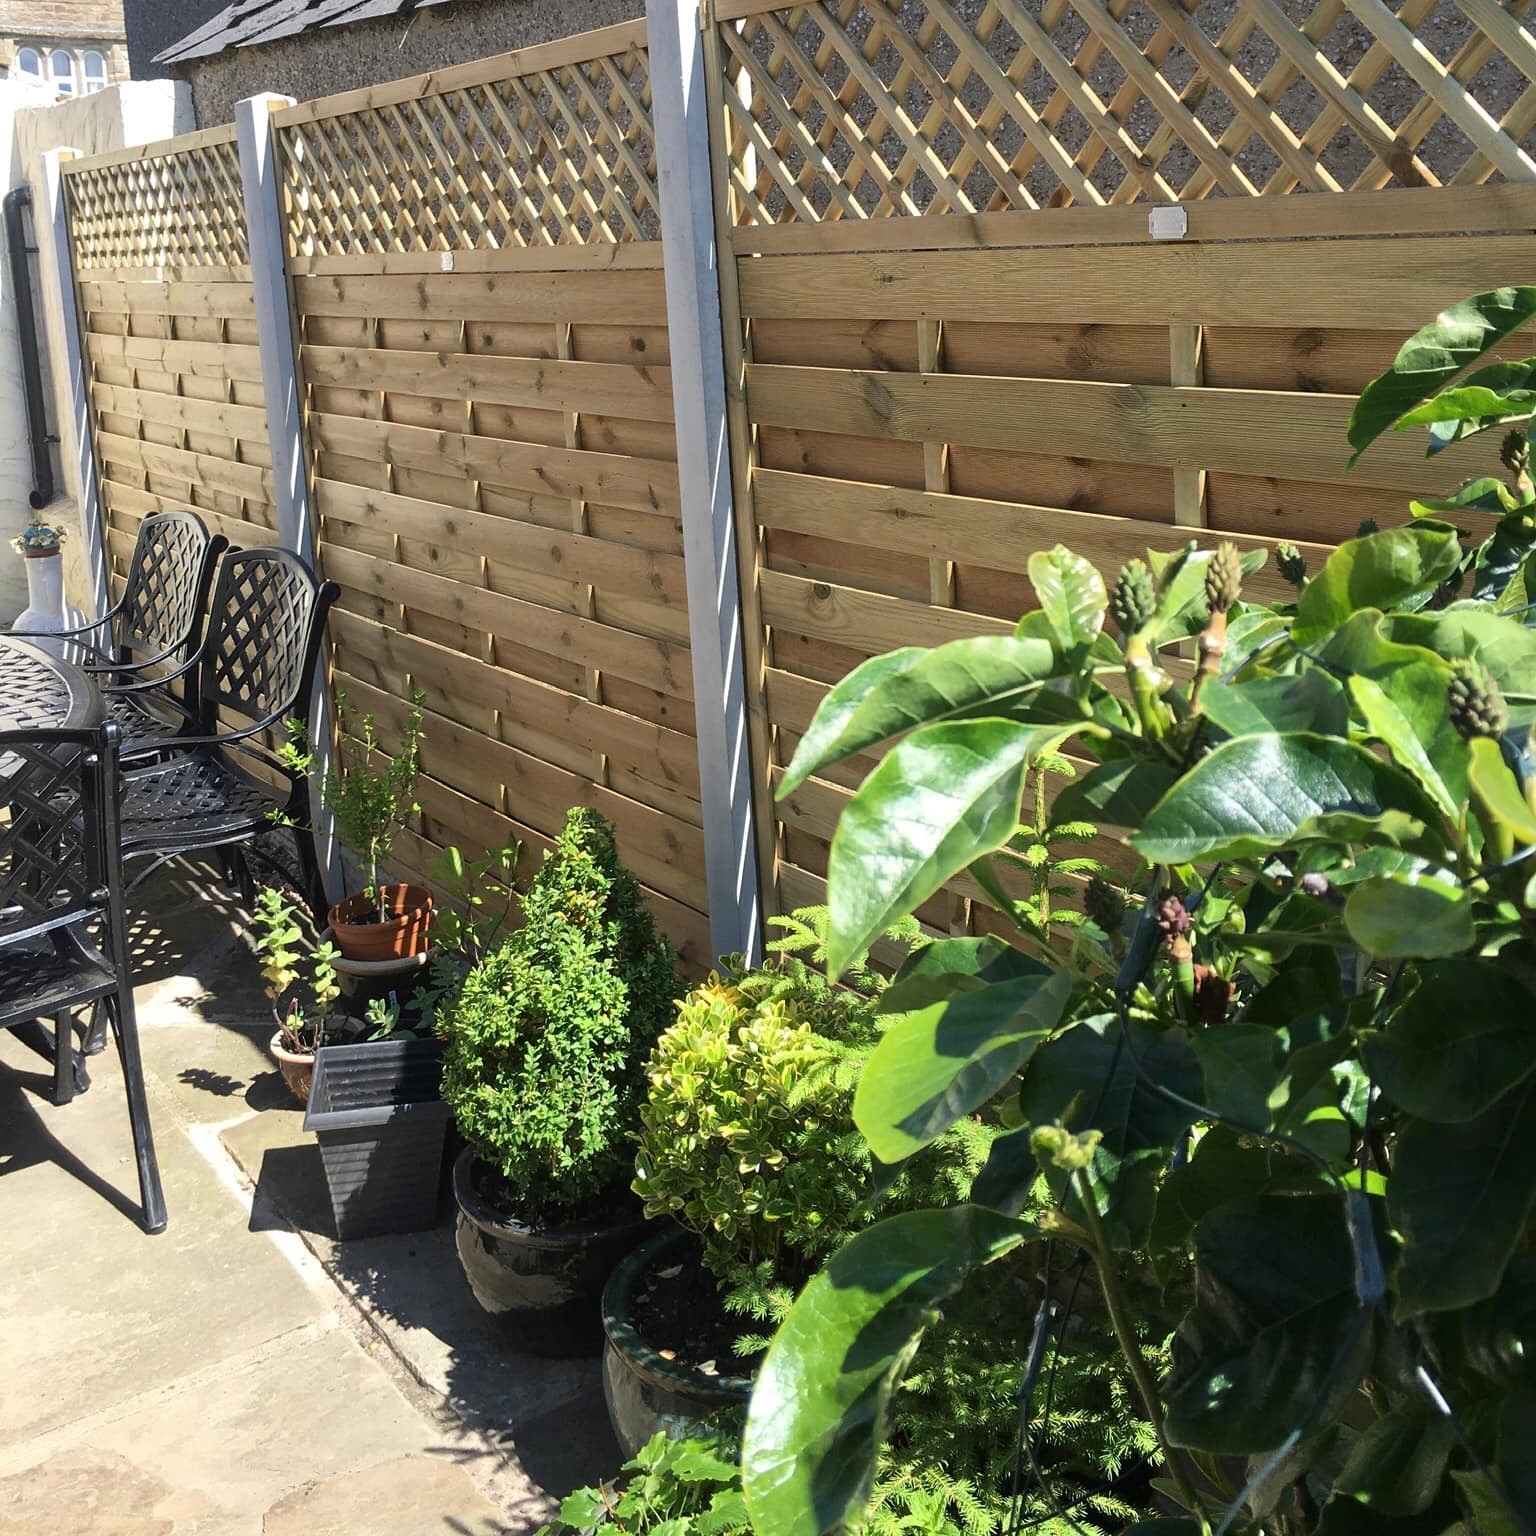 New, professional fencing surrounded by shrubbery